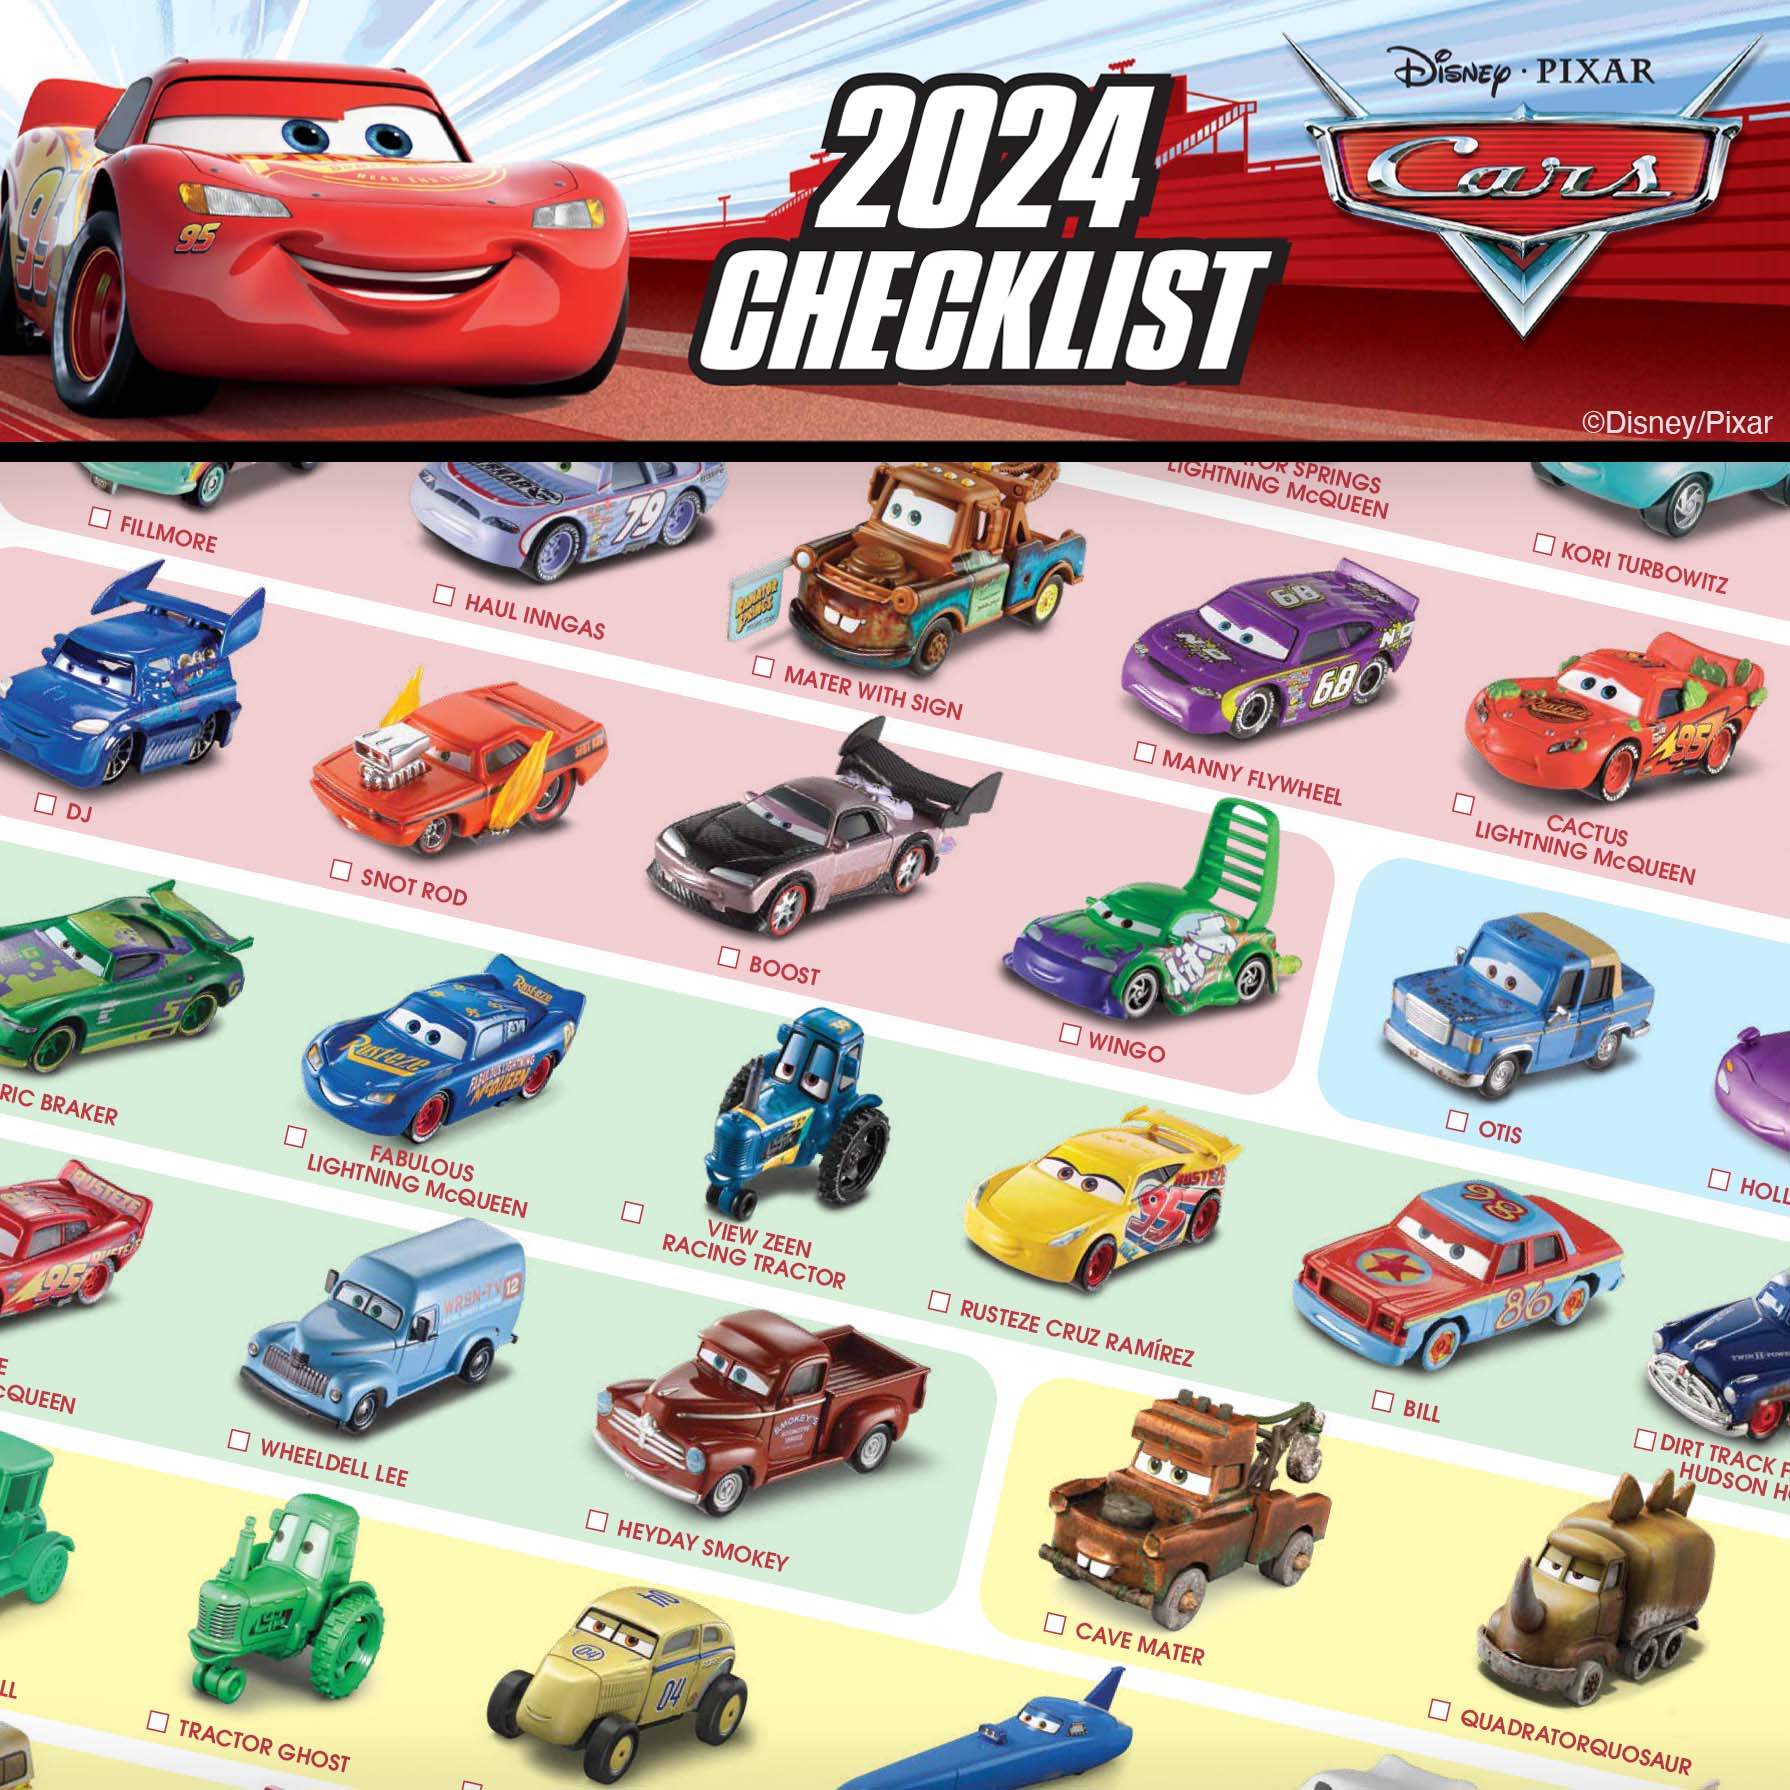 Disney Pixar Cars Toys for Kids and Collectors